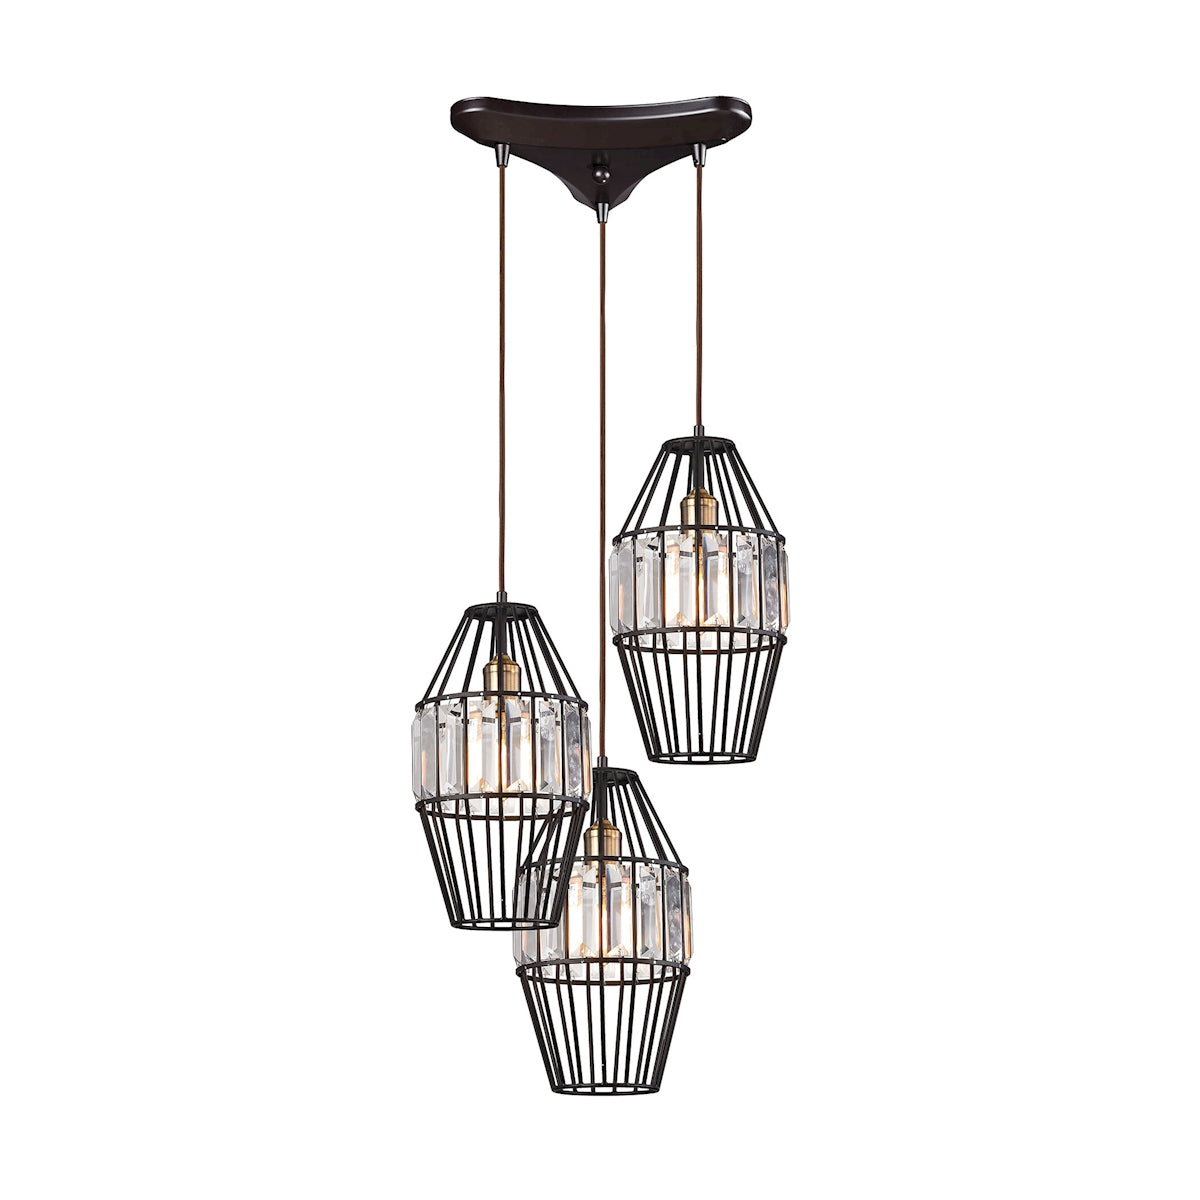 ELK Lighting 14248/3 Yardley 3-Light Triangular Pendant Fixture in Oil Rubbed Bronze with Clear Crystal on Wire Cages